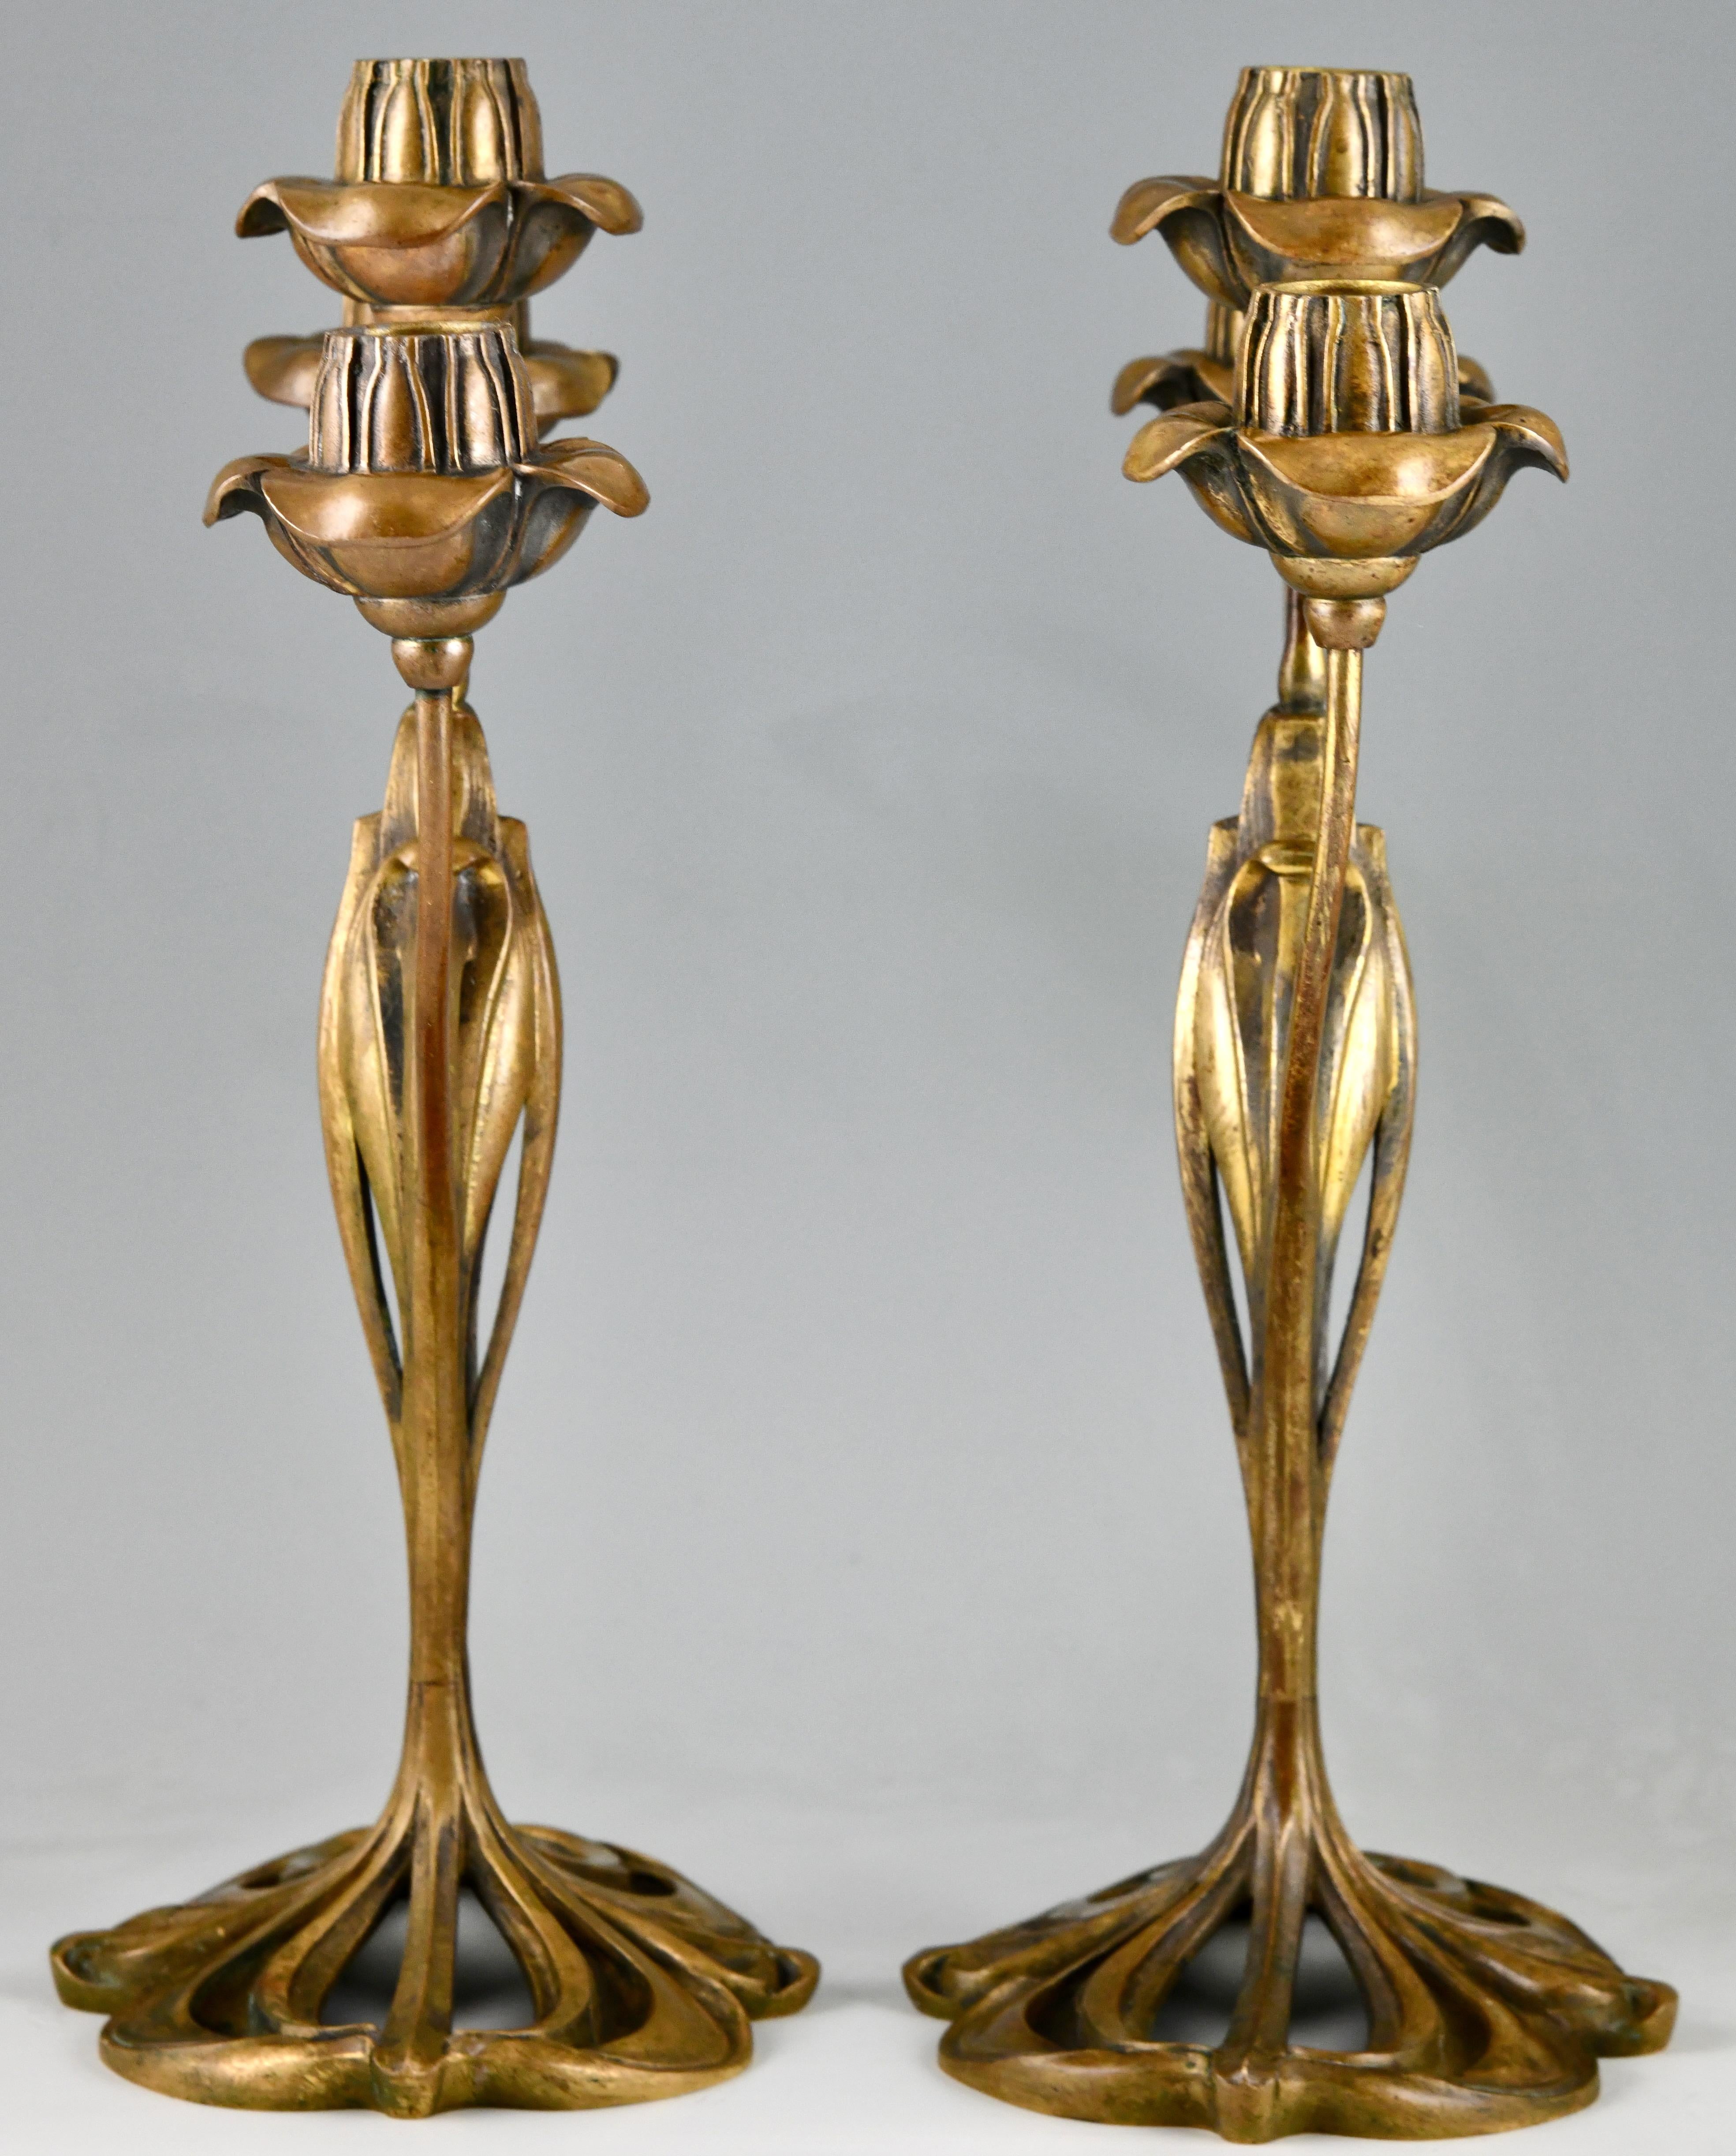 Pair of bronze Art Nouveau candelabra with floral design by Georges de Feure In Good Condition For Sale In Antwerp, BE